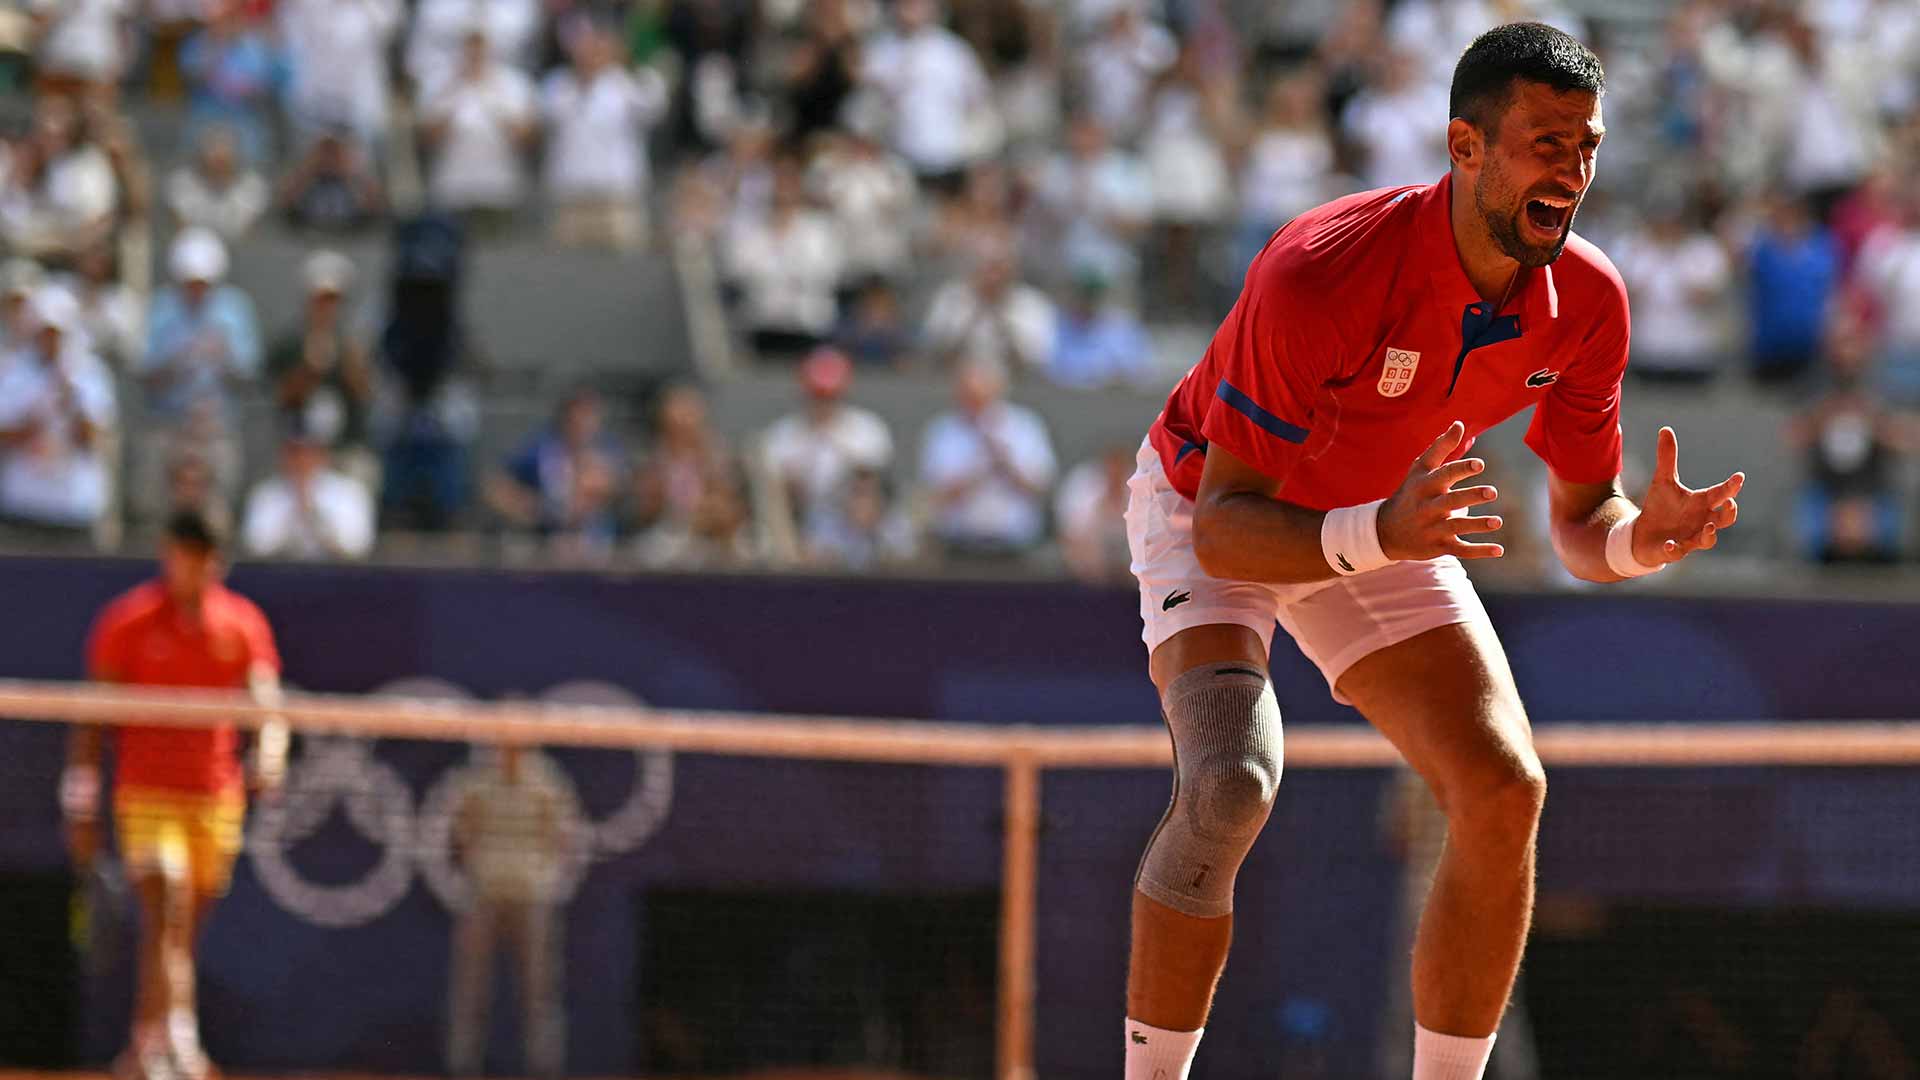 Djokovic completes his Golden Slam puzzle: ‘I can’t wait for the celebration’